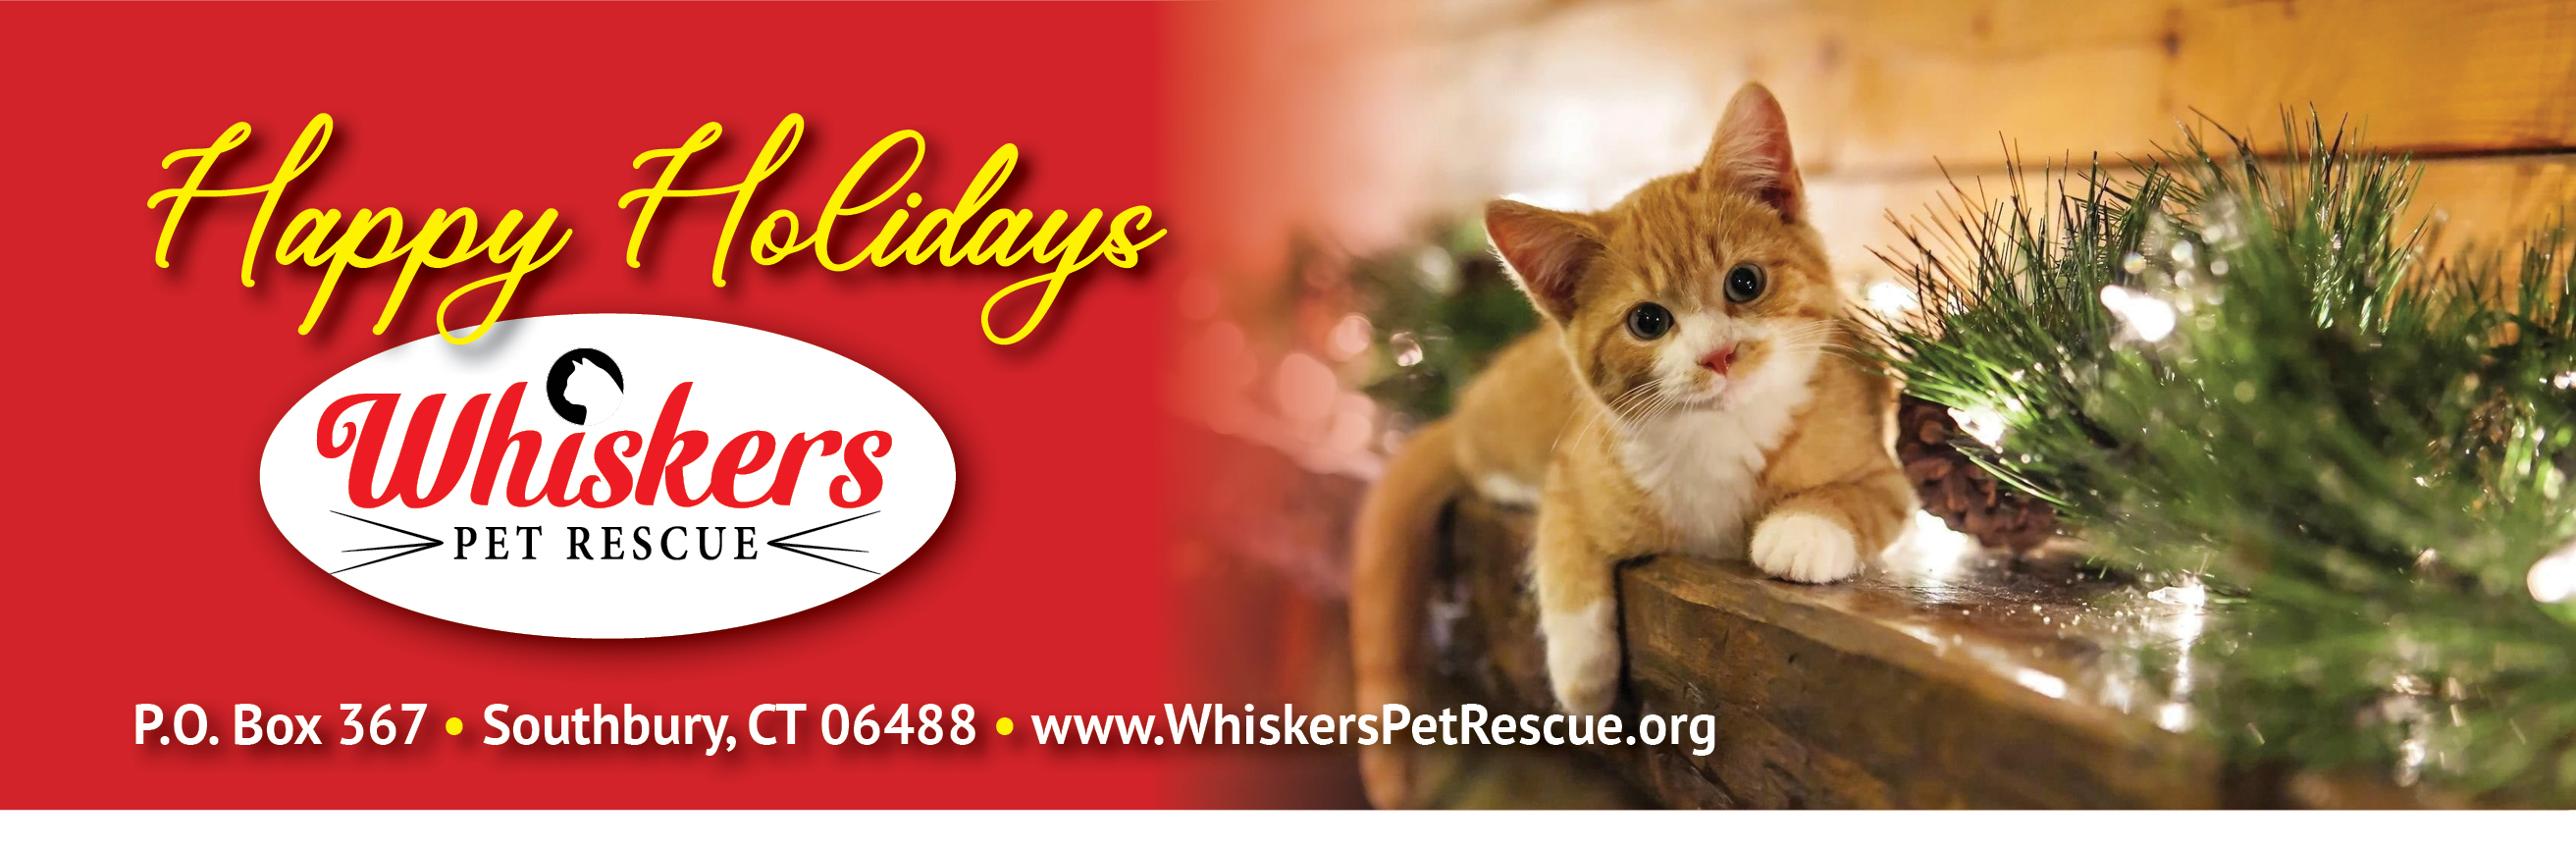 Happy Holidays from Whiskers!